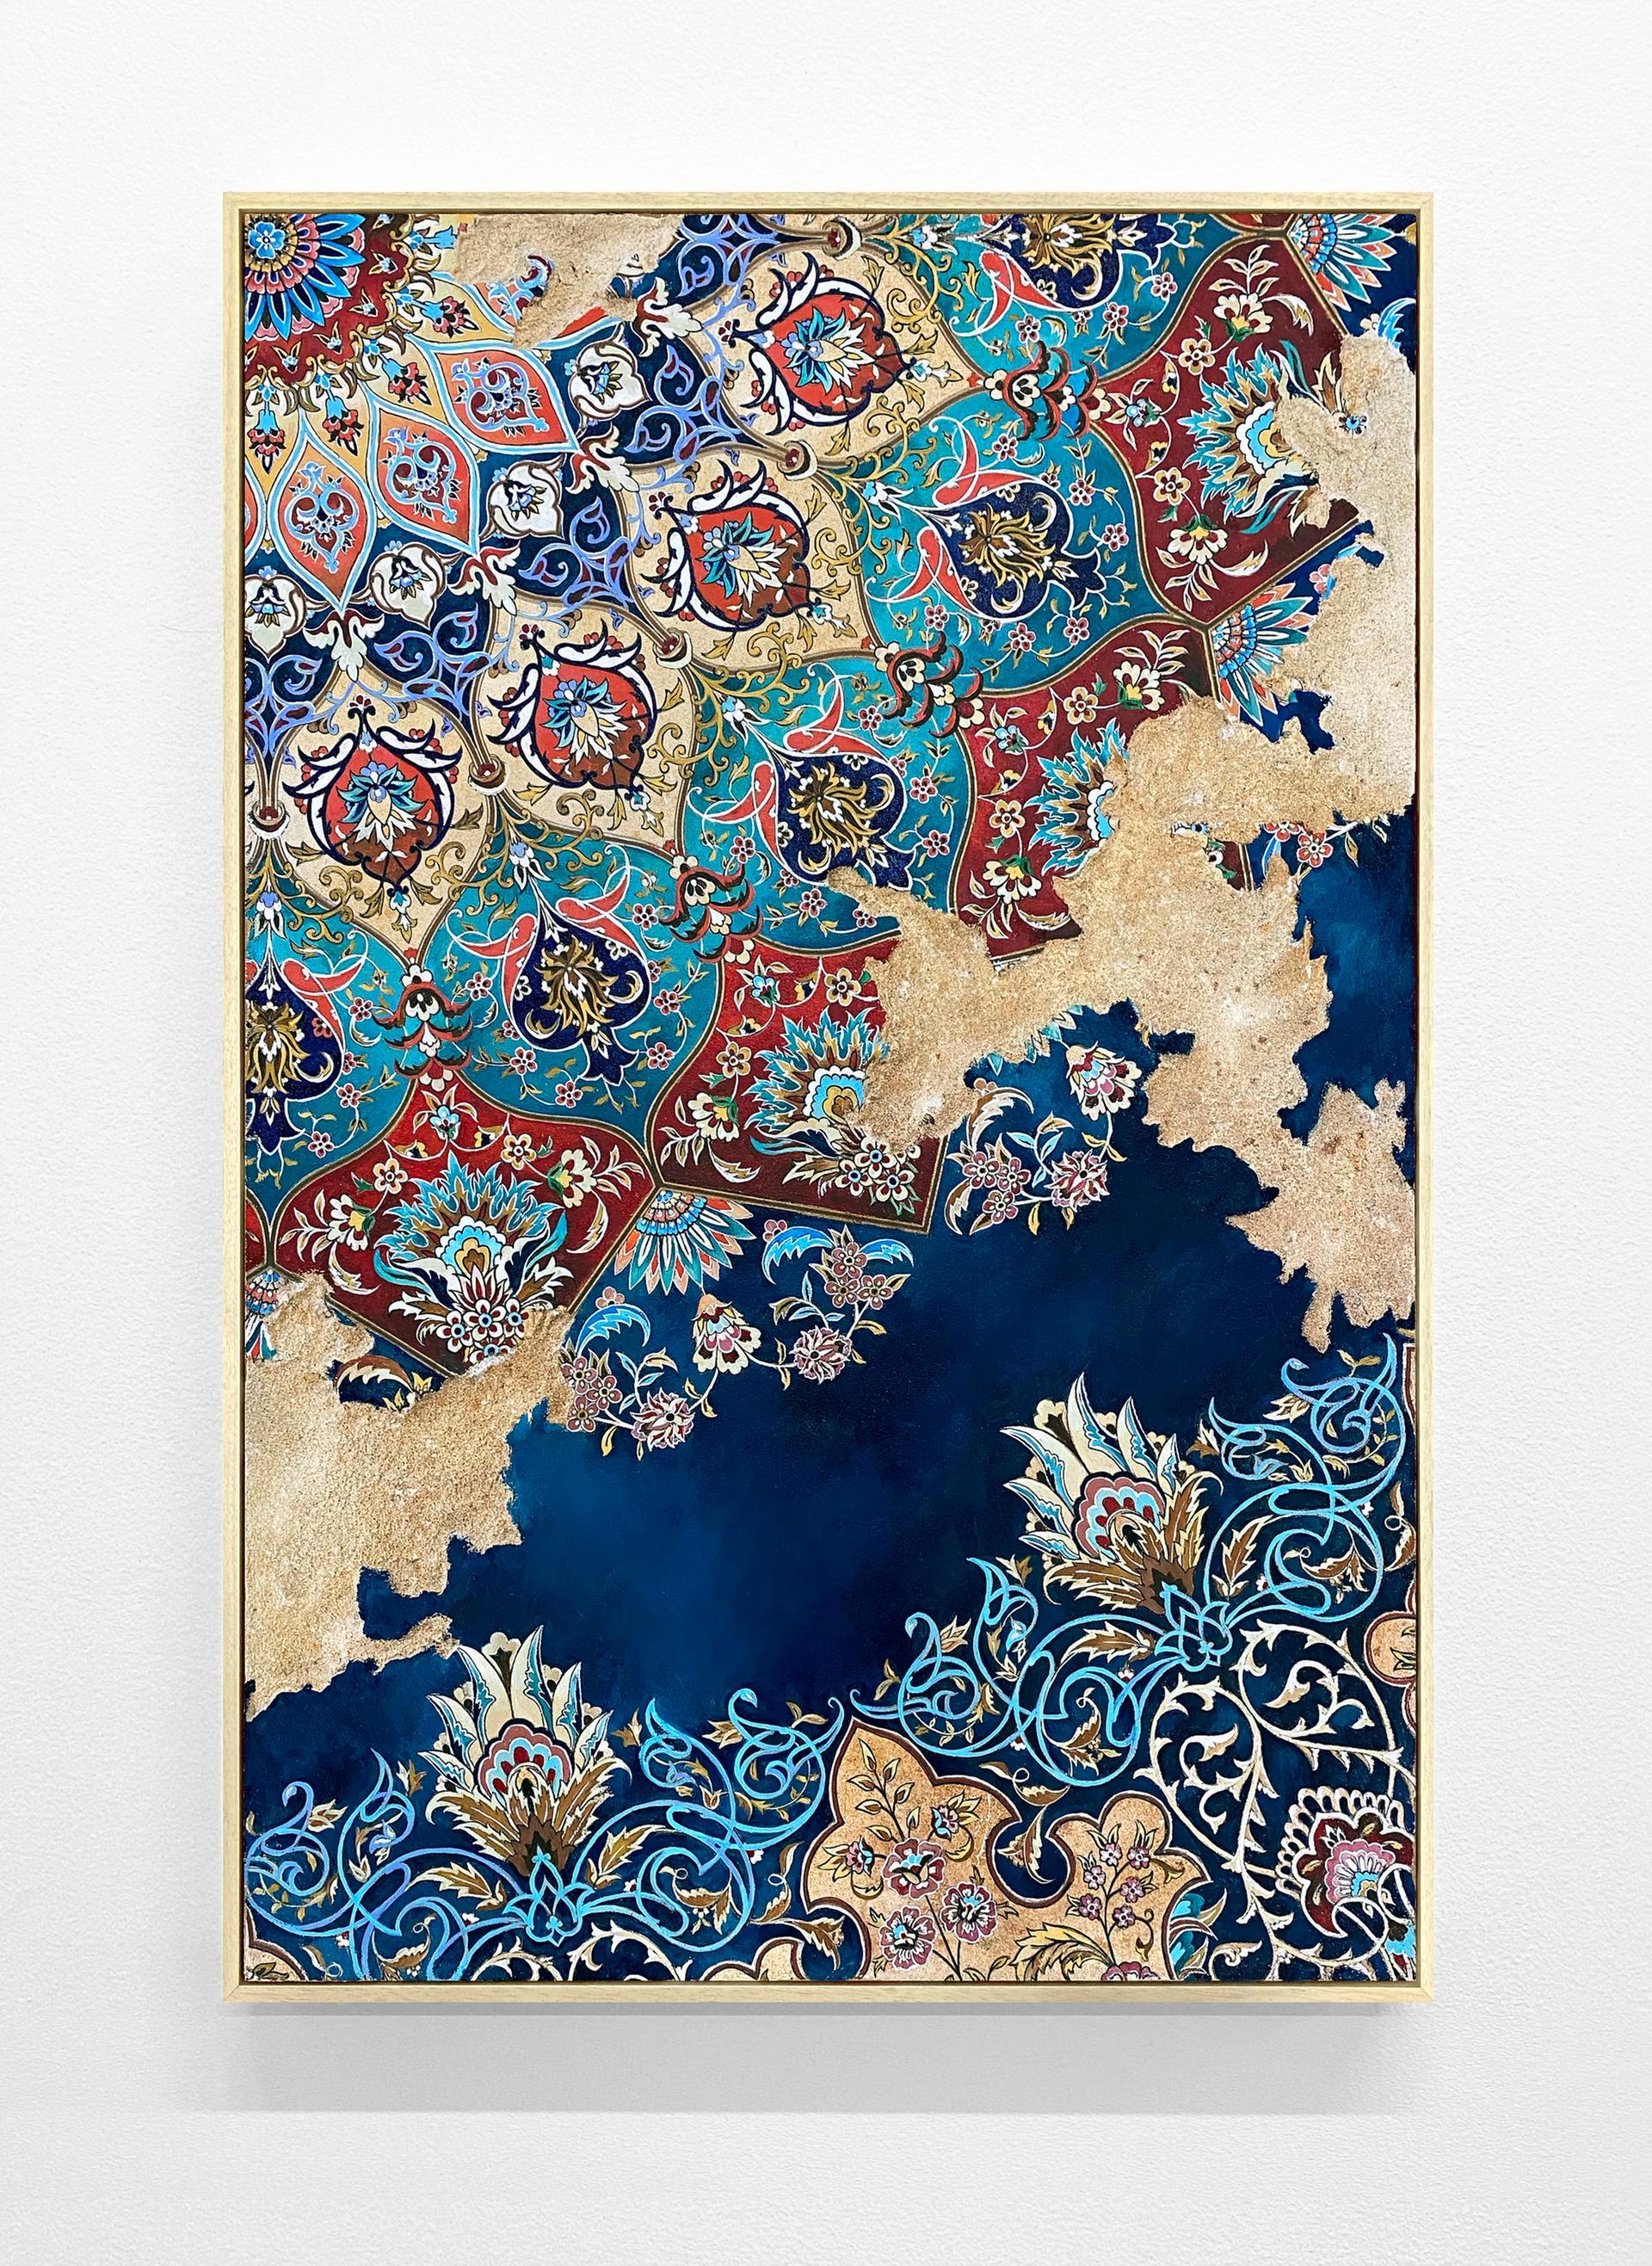 Persian Carpets Merge With Crumbling Concrete in Jason Seife's